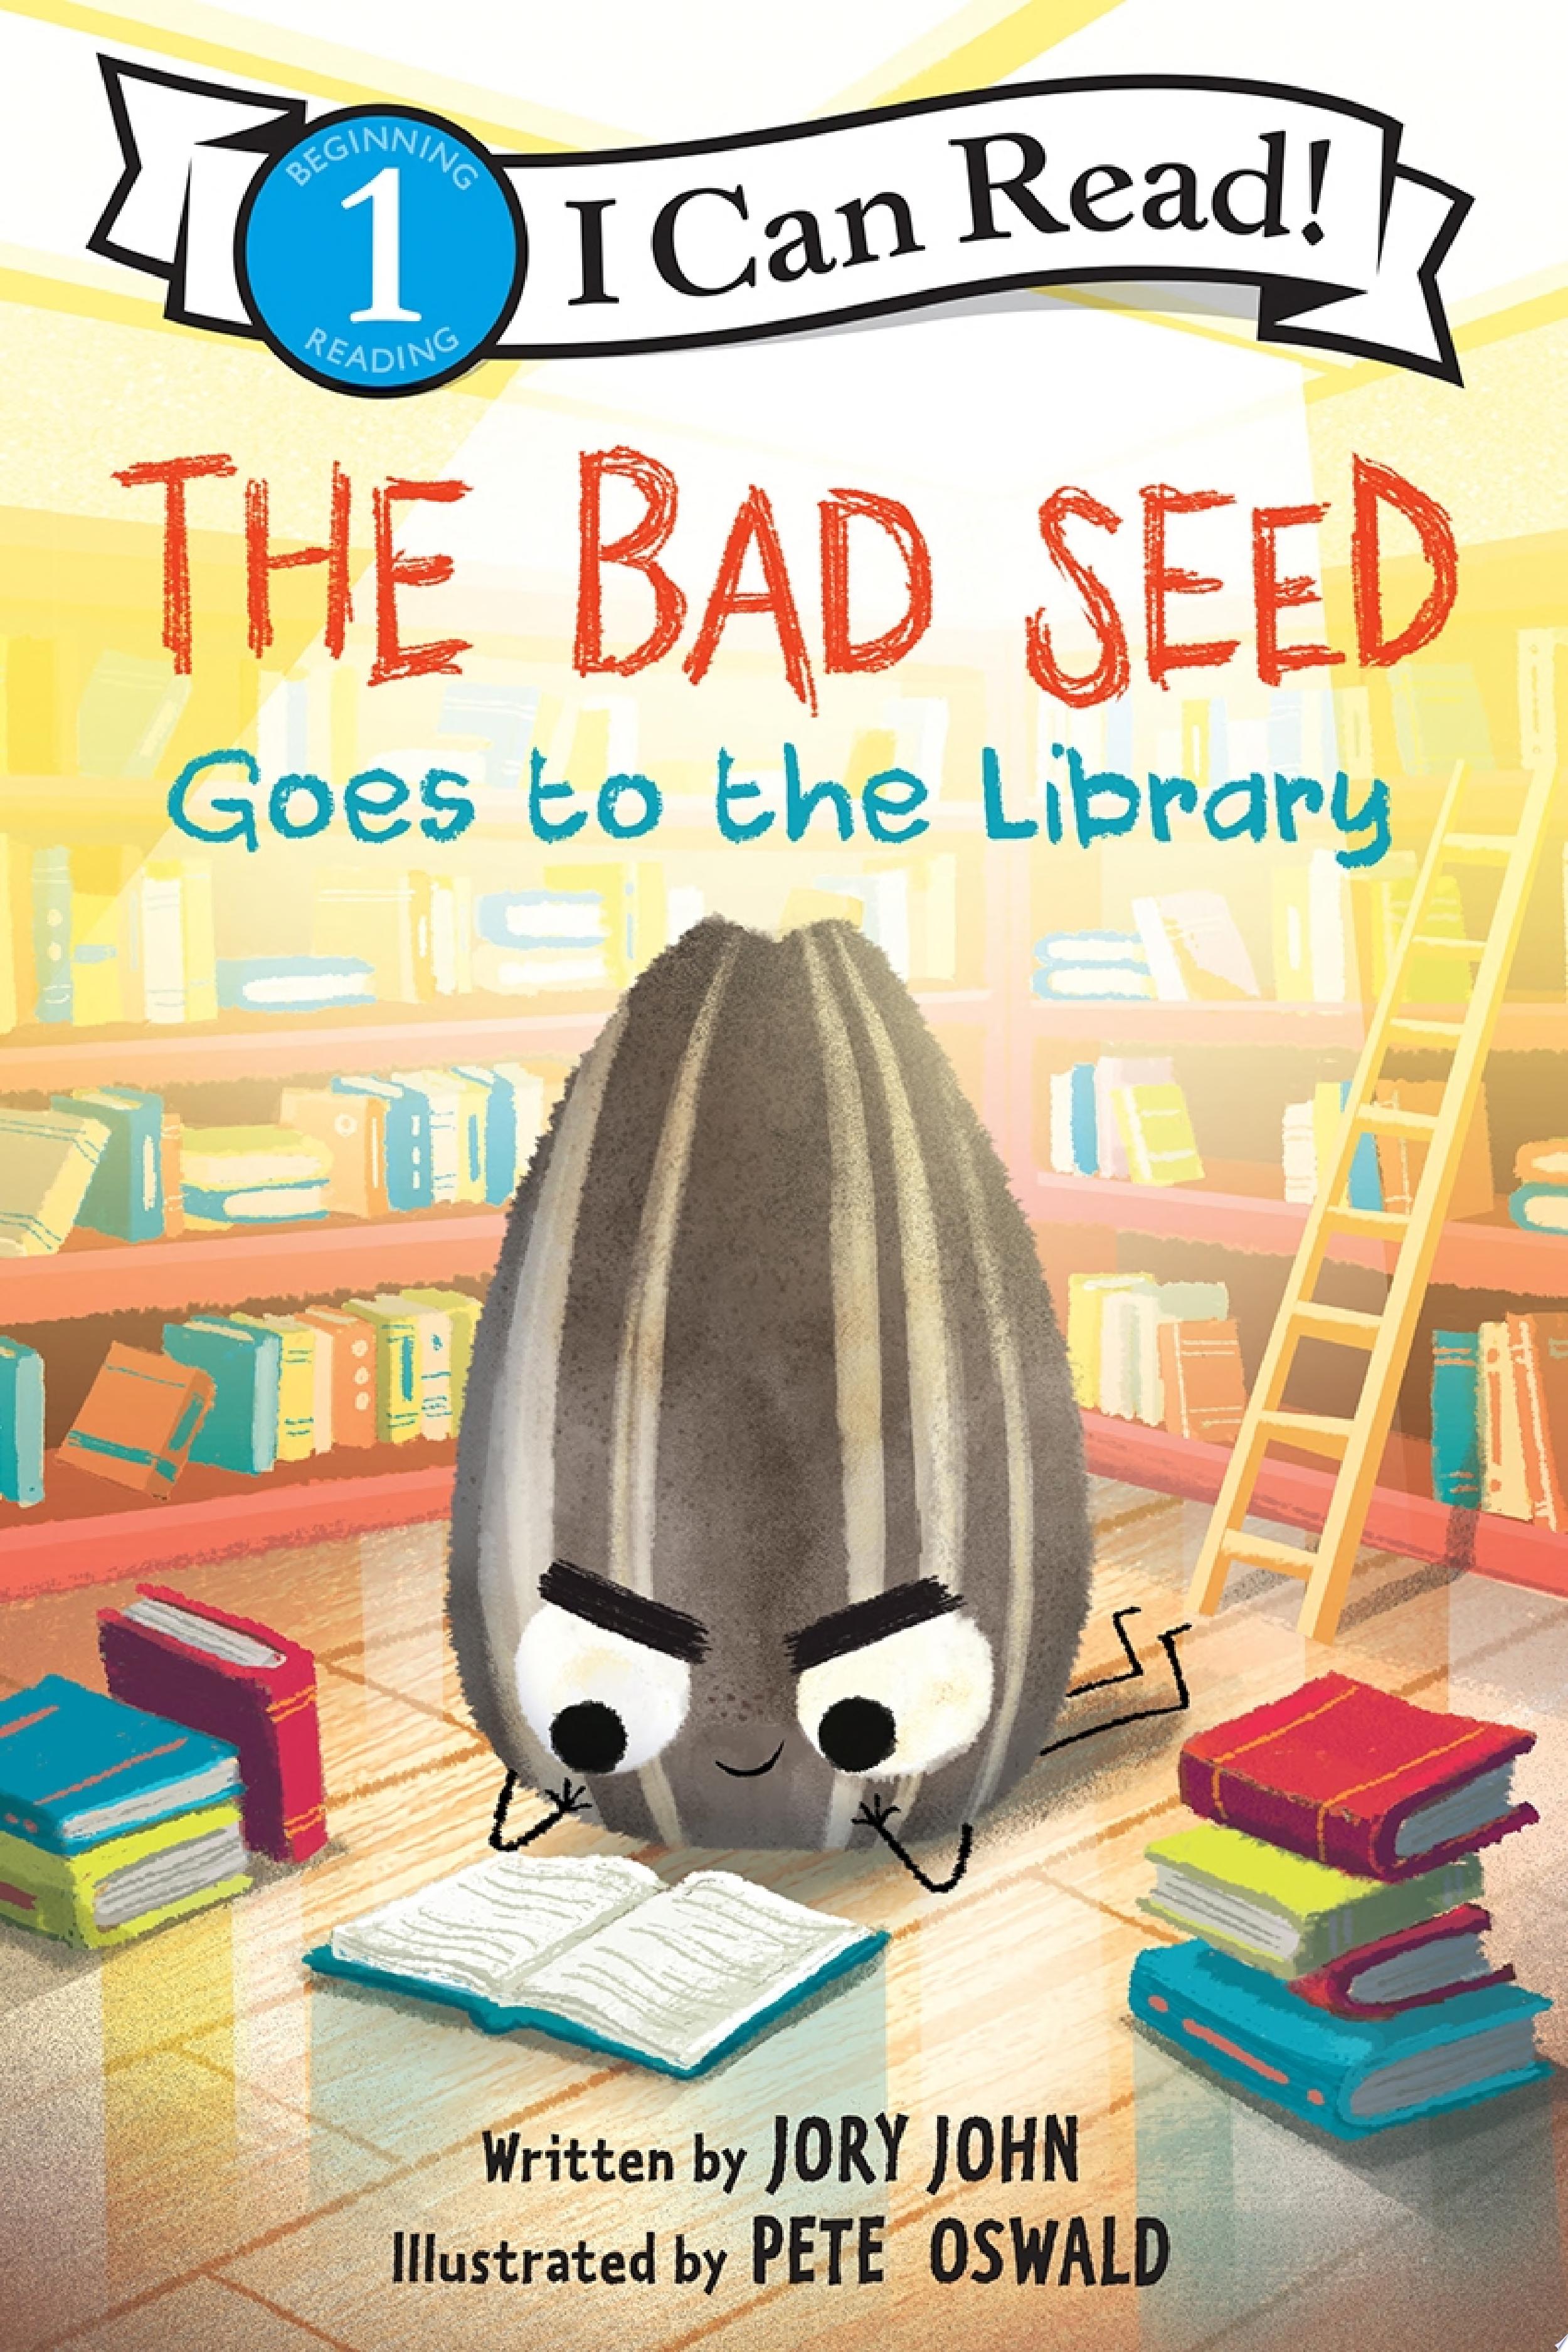 Image for "The Bad Seed Goes to the Library"